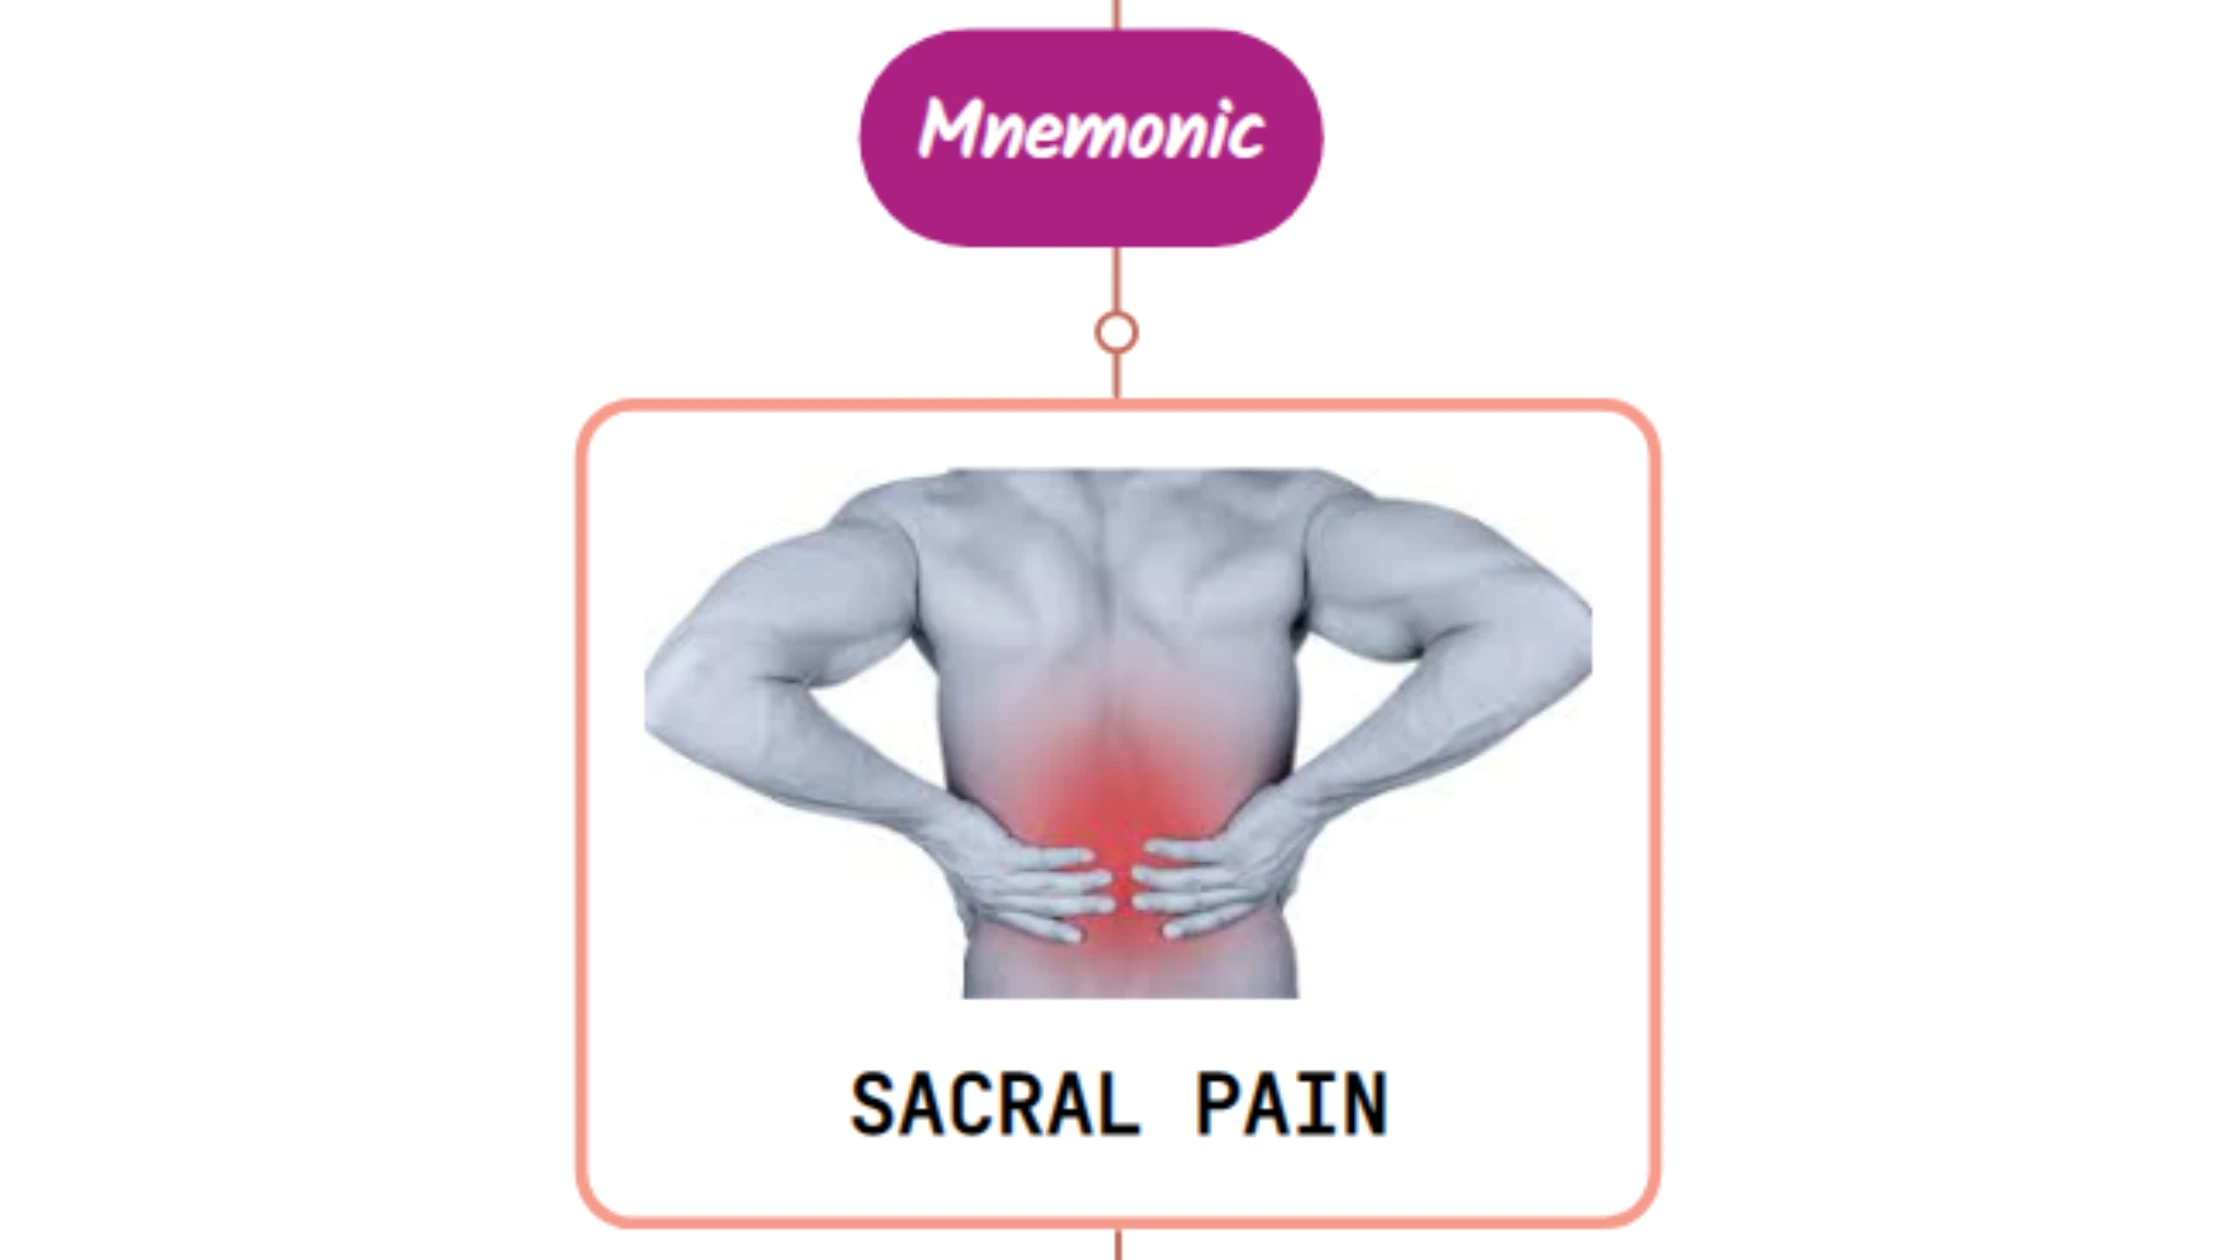 You are currently viewing Sacral Pain with Gynecologic and Urologic Disease : Mnemonics